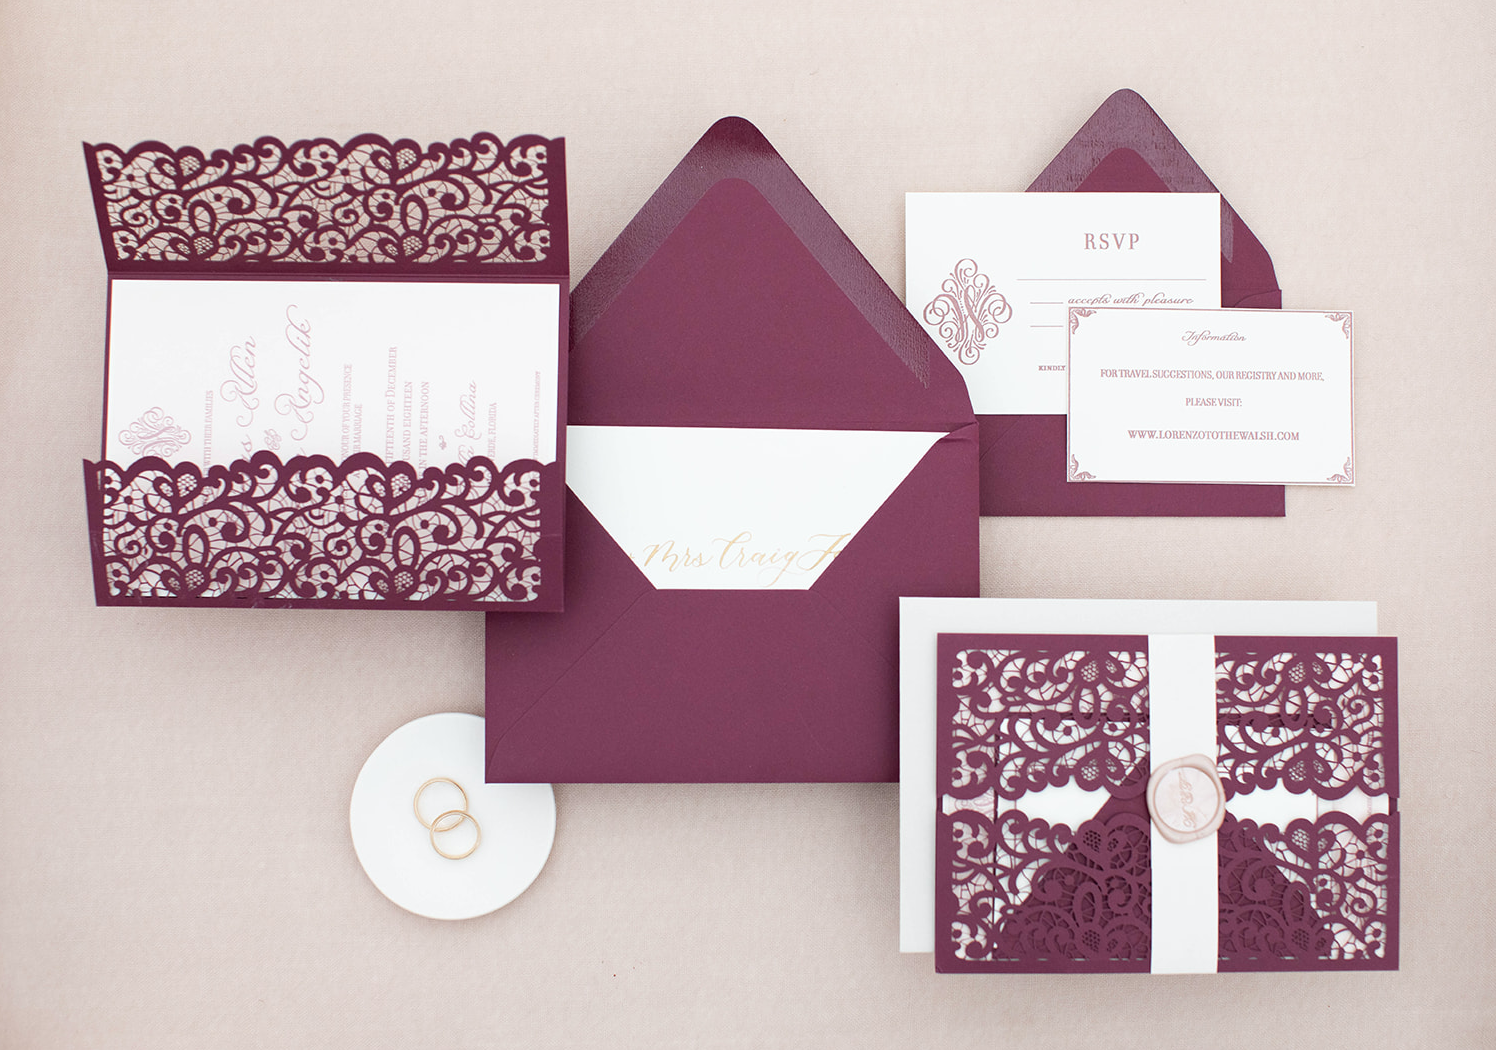 traditional wedding suite letterpress printing burgundy wedding invitation blush pink wax seal lace gate card calligraphy gold classic wedding stationery